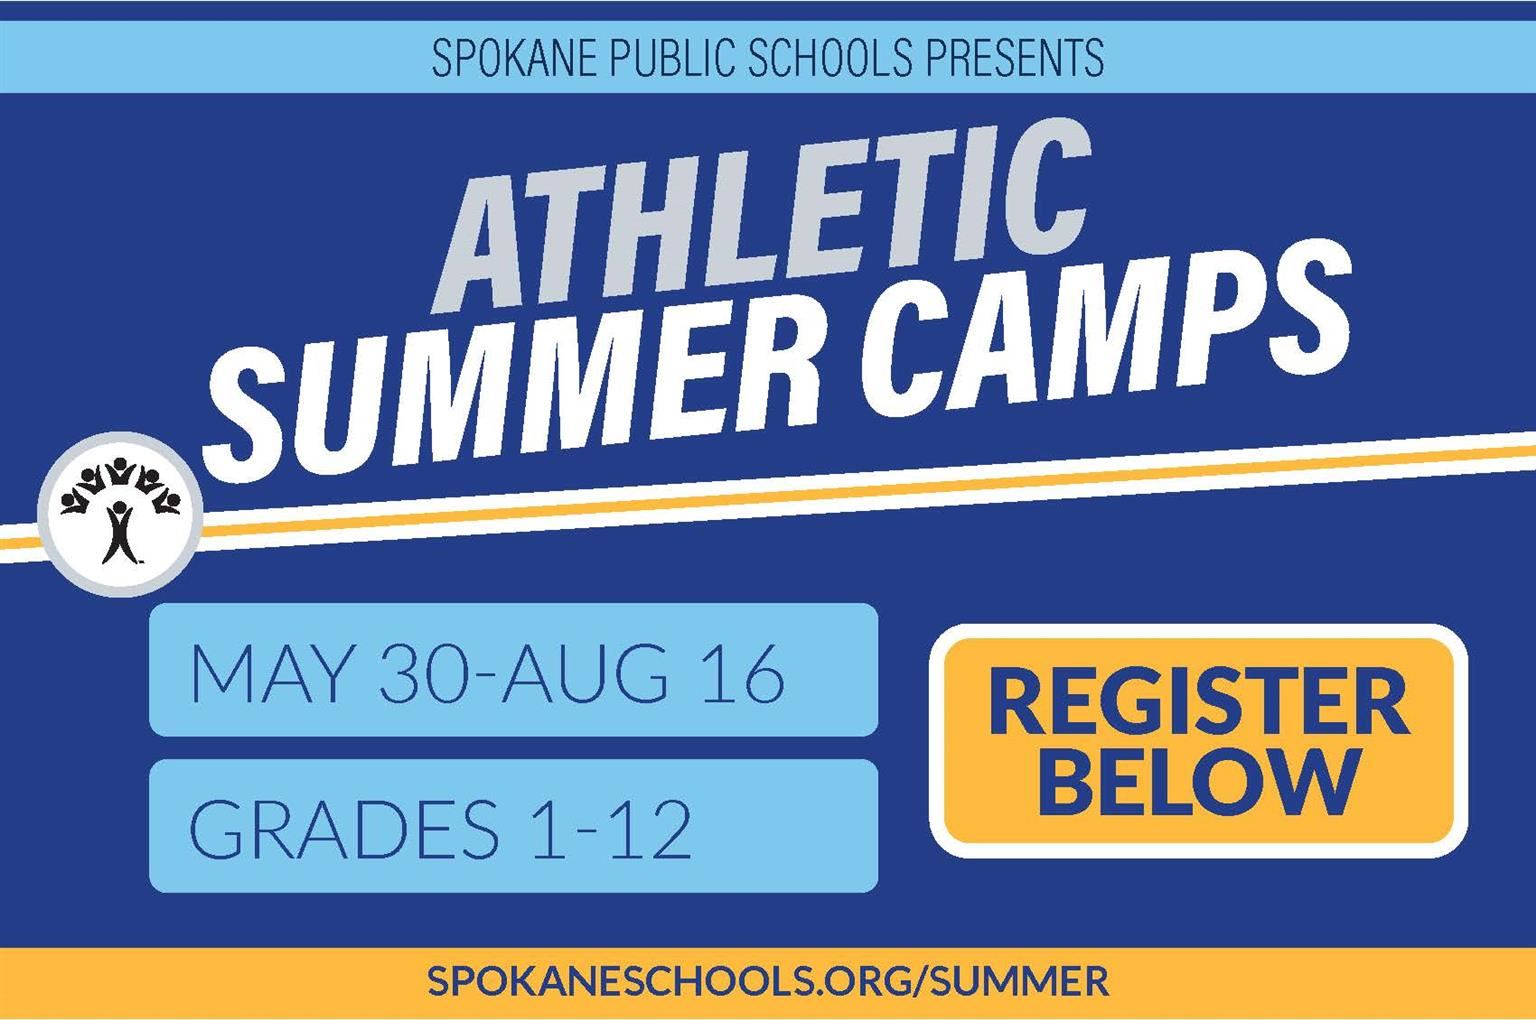 Athletic Summer Camps